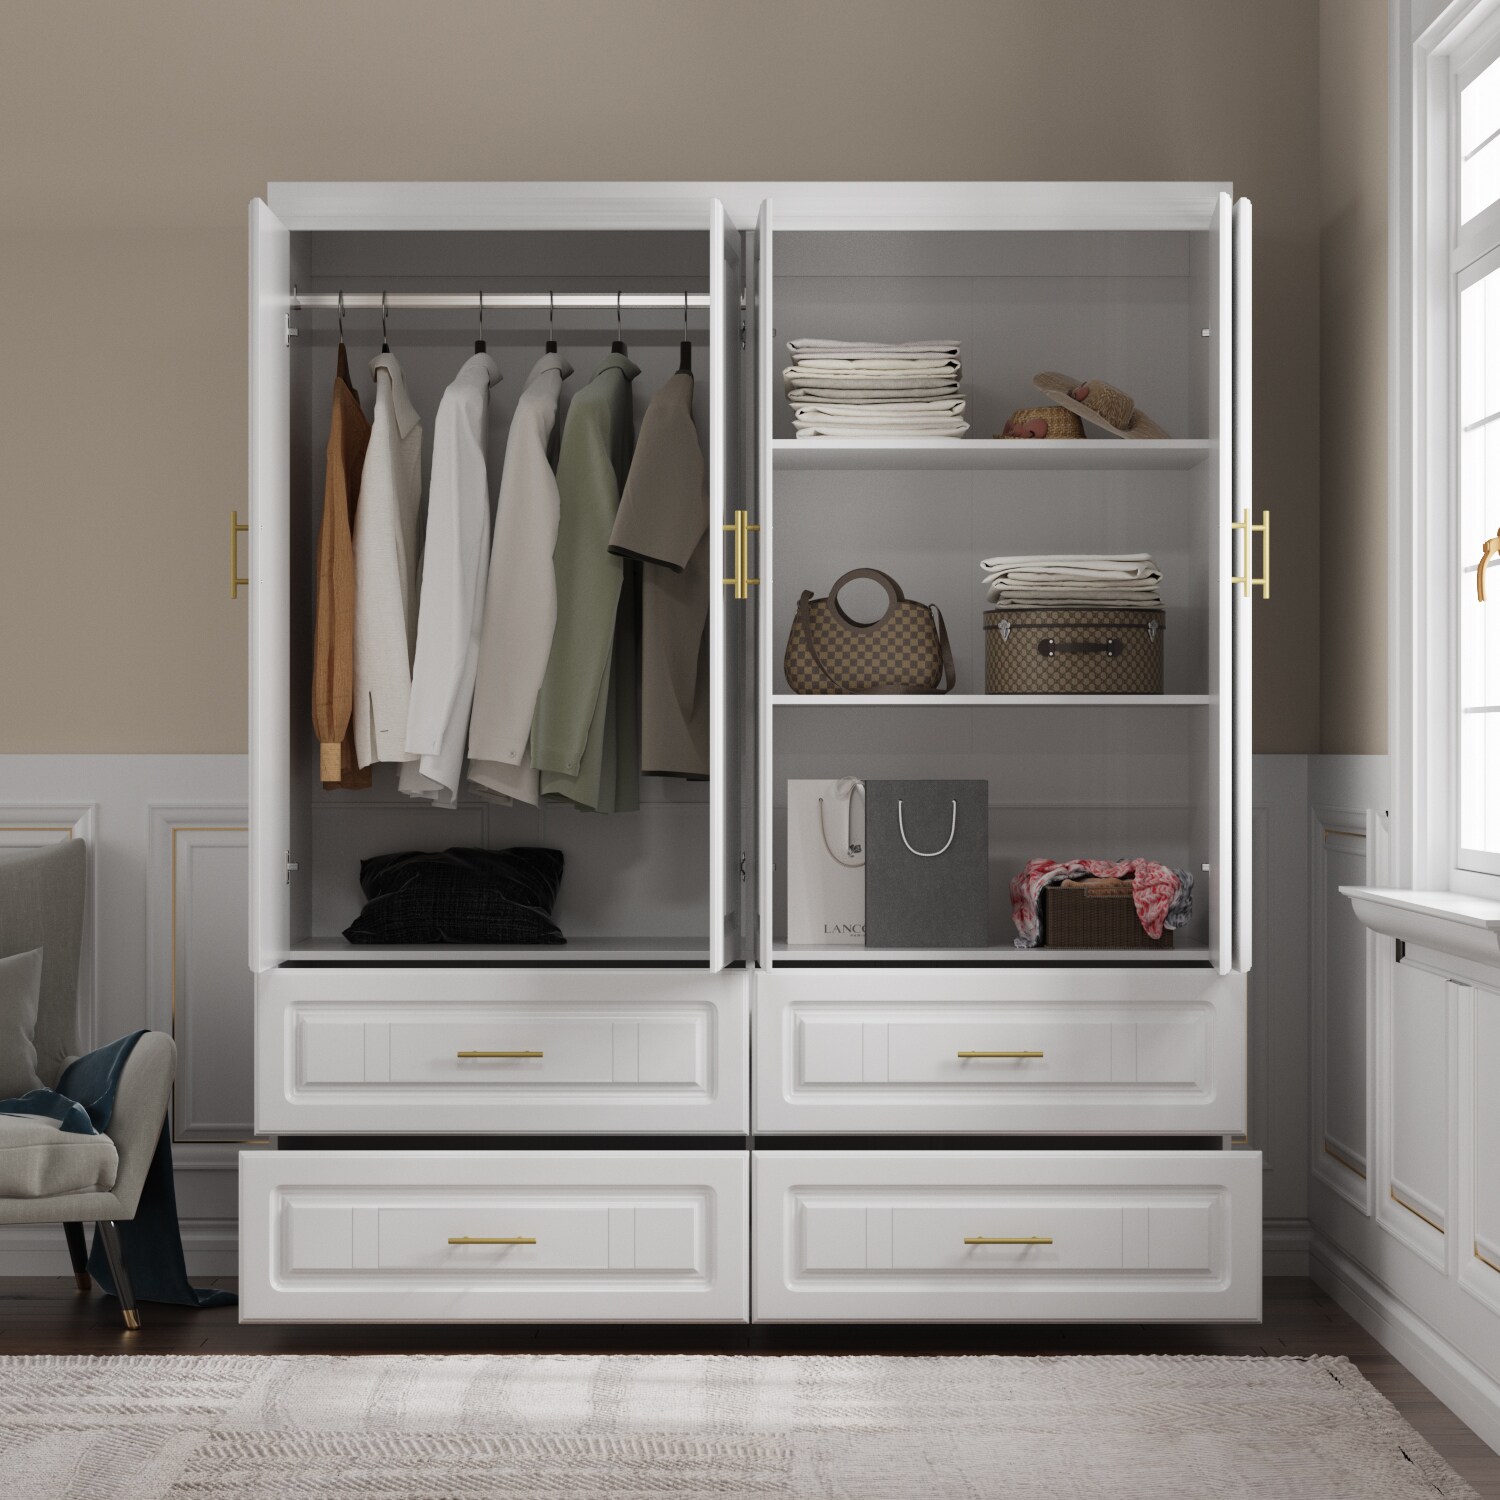 FUFU&GAGA Contemporary 4-Door Wardrobe Closet with 2 Drawers, Durable PB  Board Construction, Distressed Paint Finish, Hanging Rods in the Armoires  department at